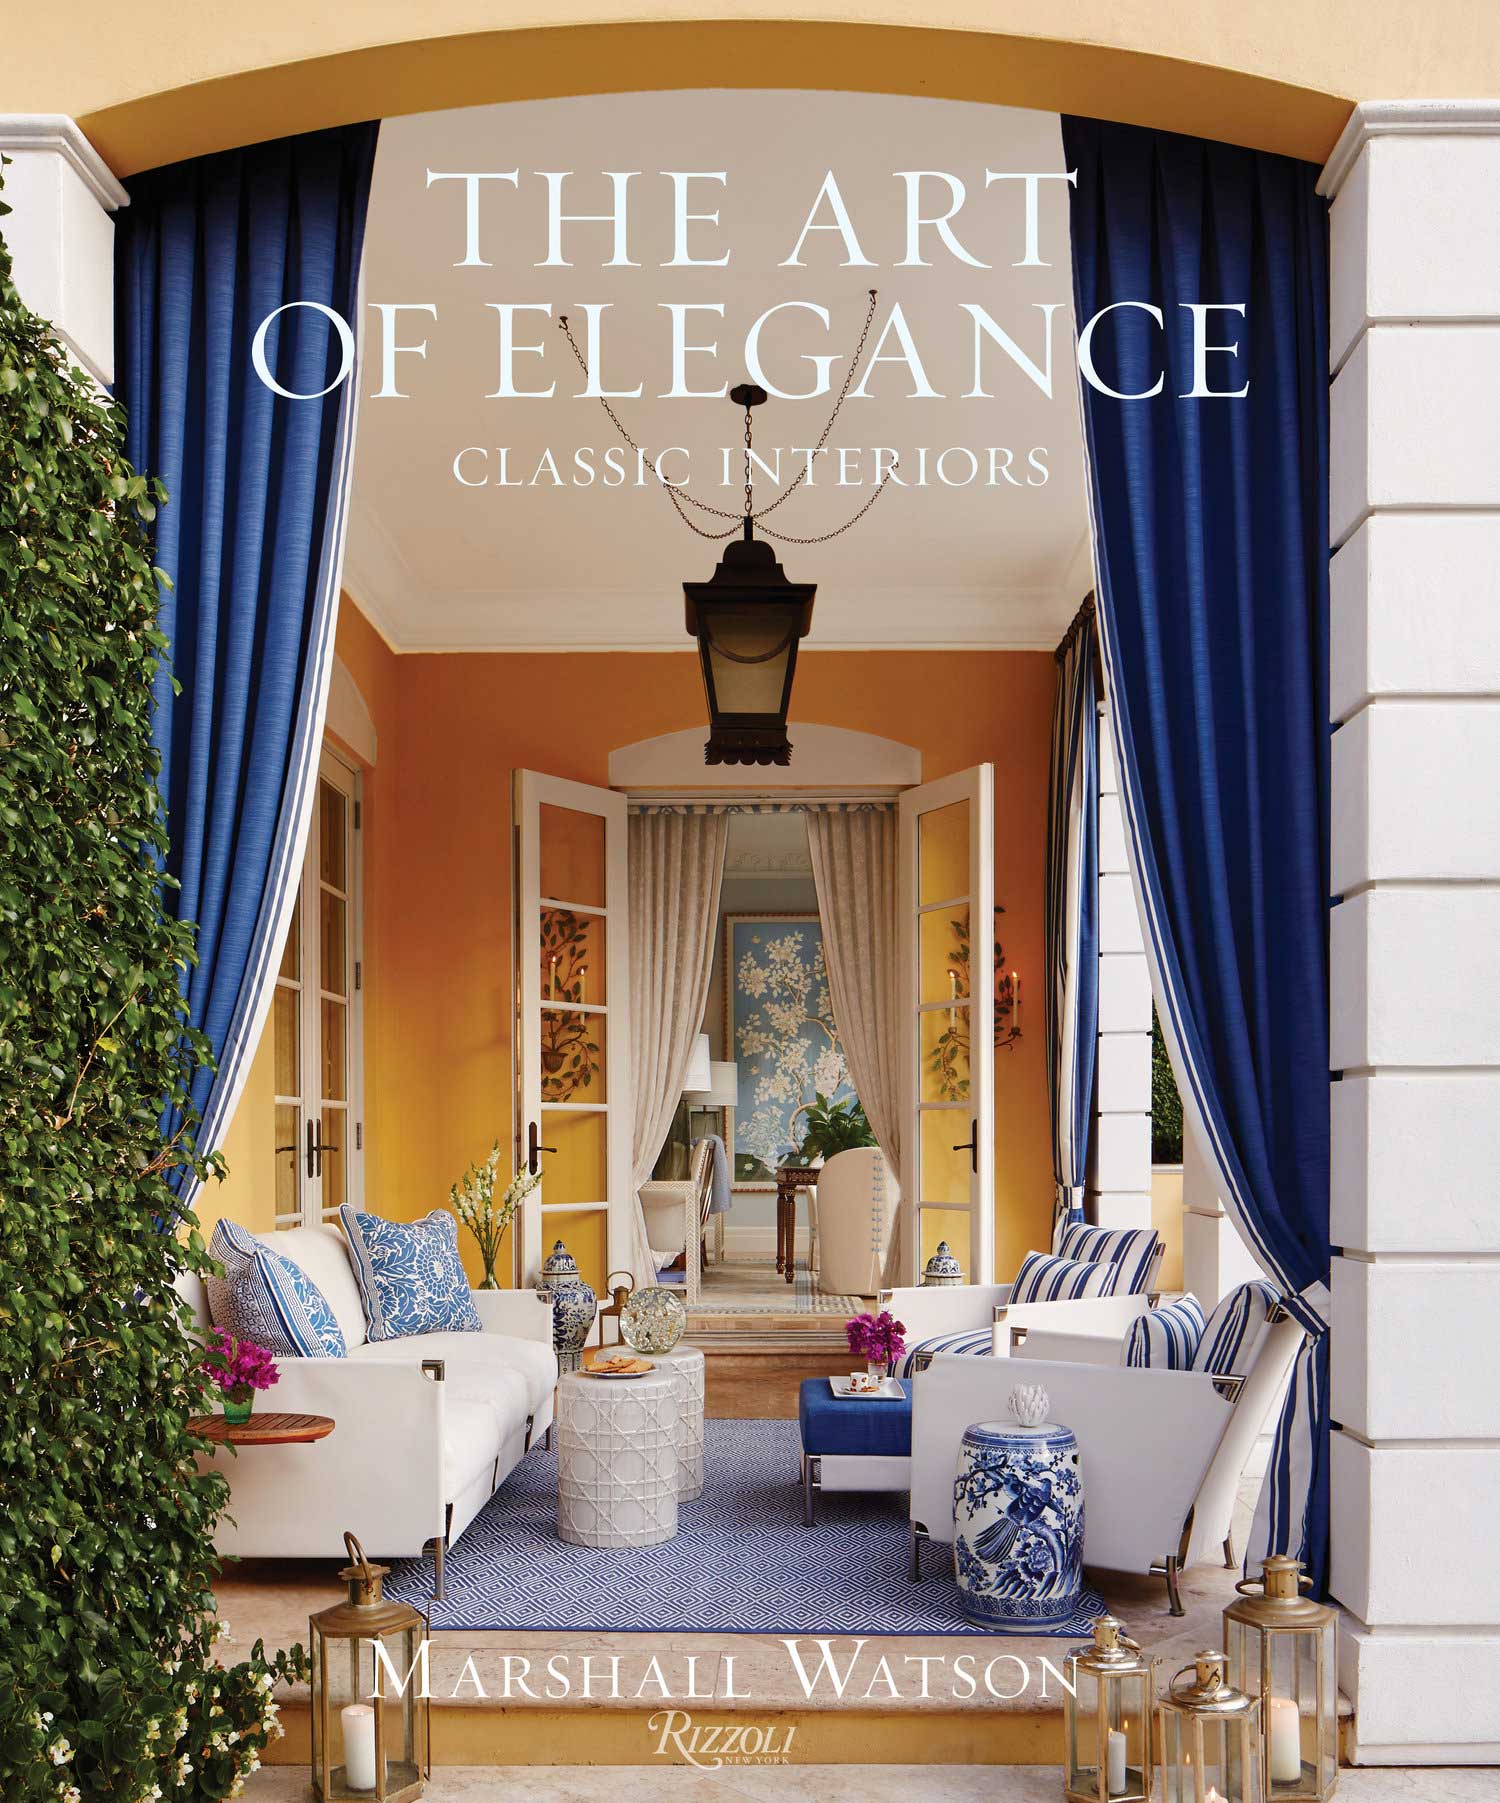 The Art of Elegance book cover